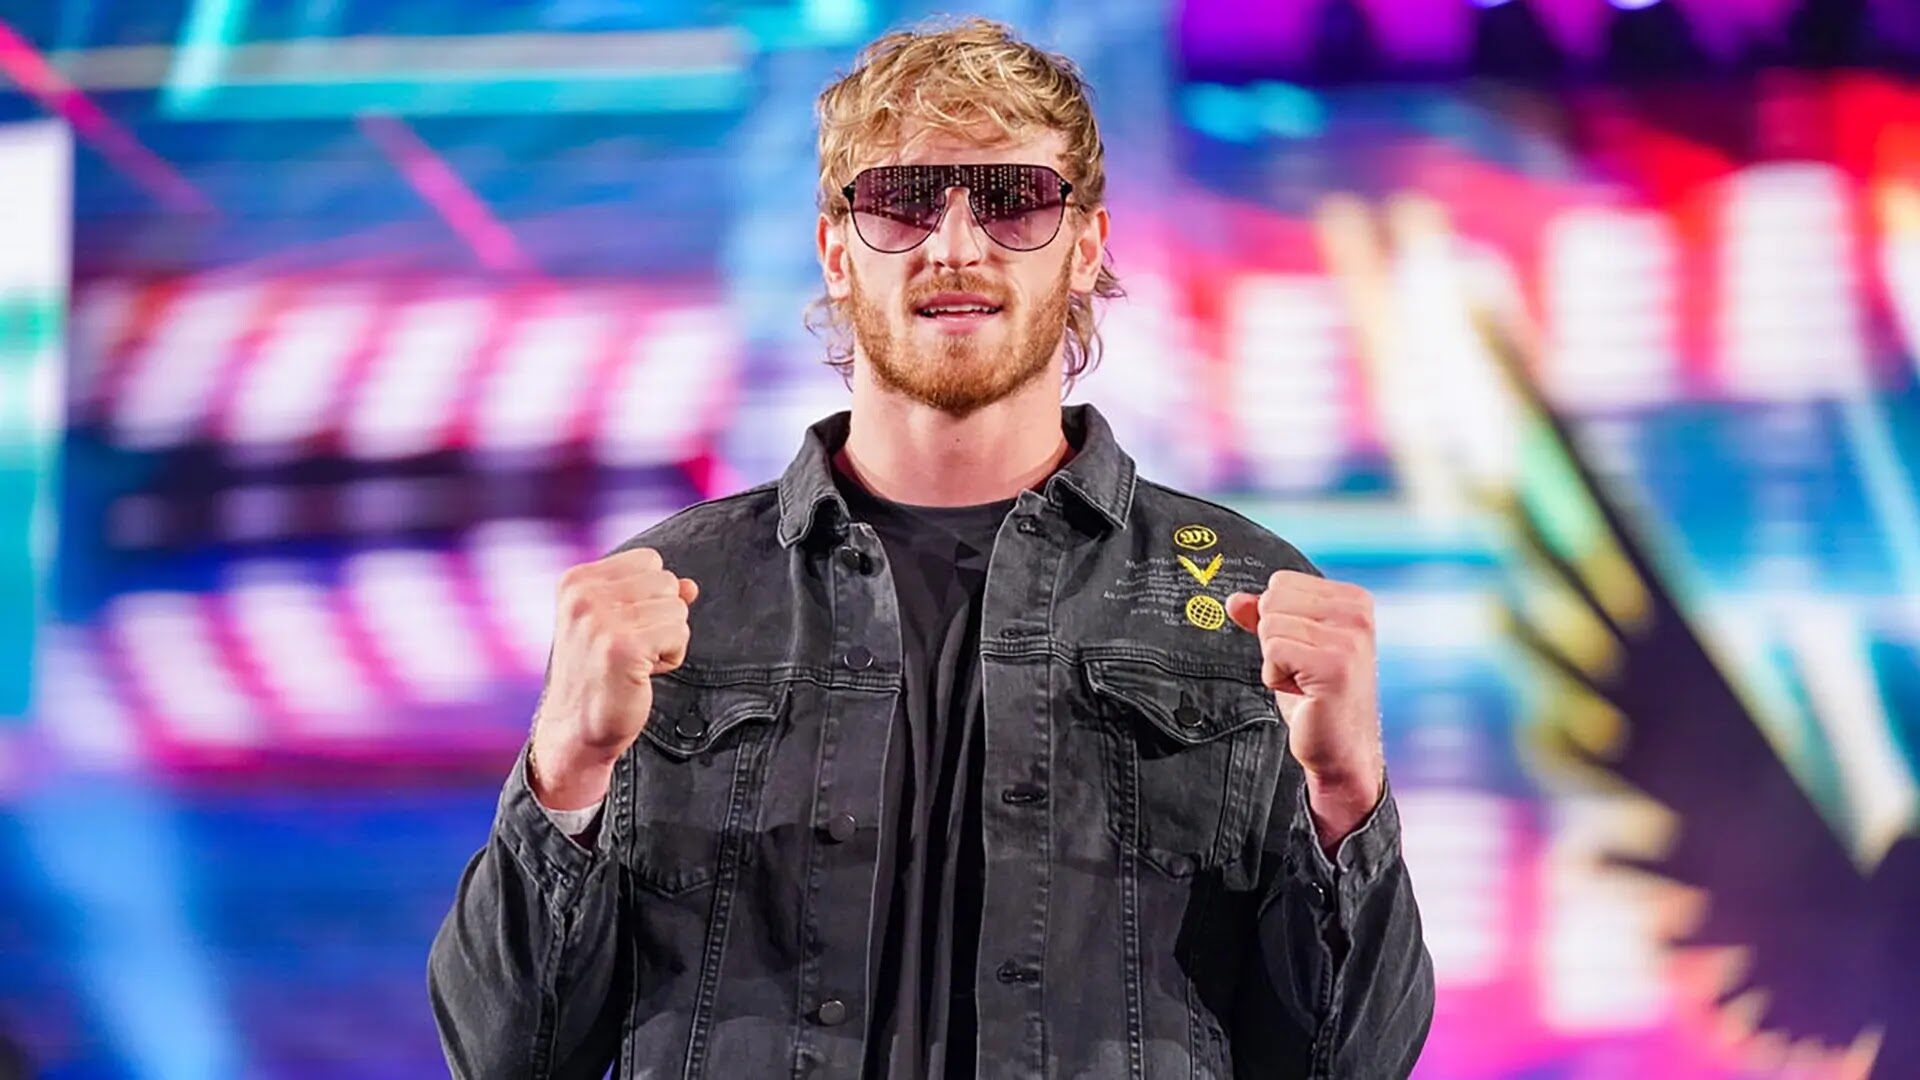 Logan Paul Scheduled To Compete At SummerSlam